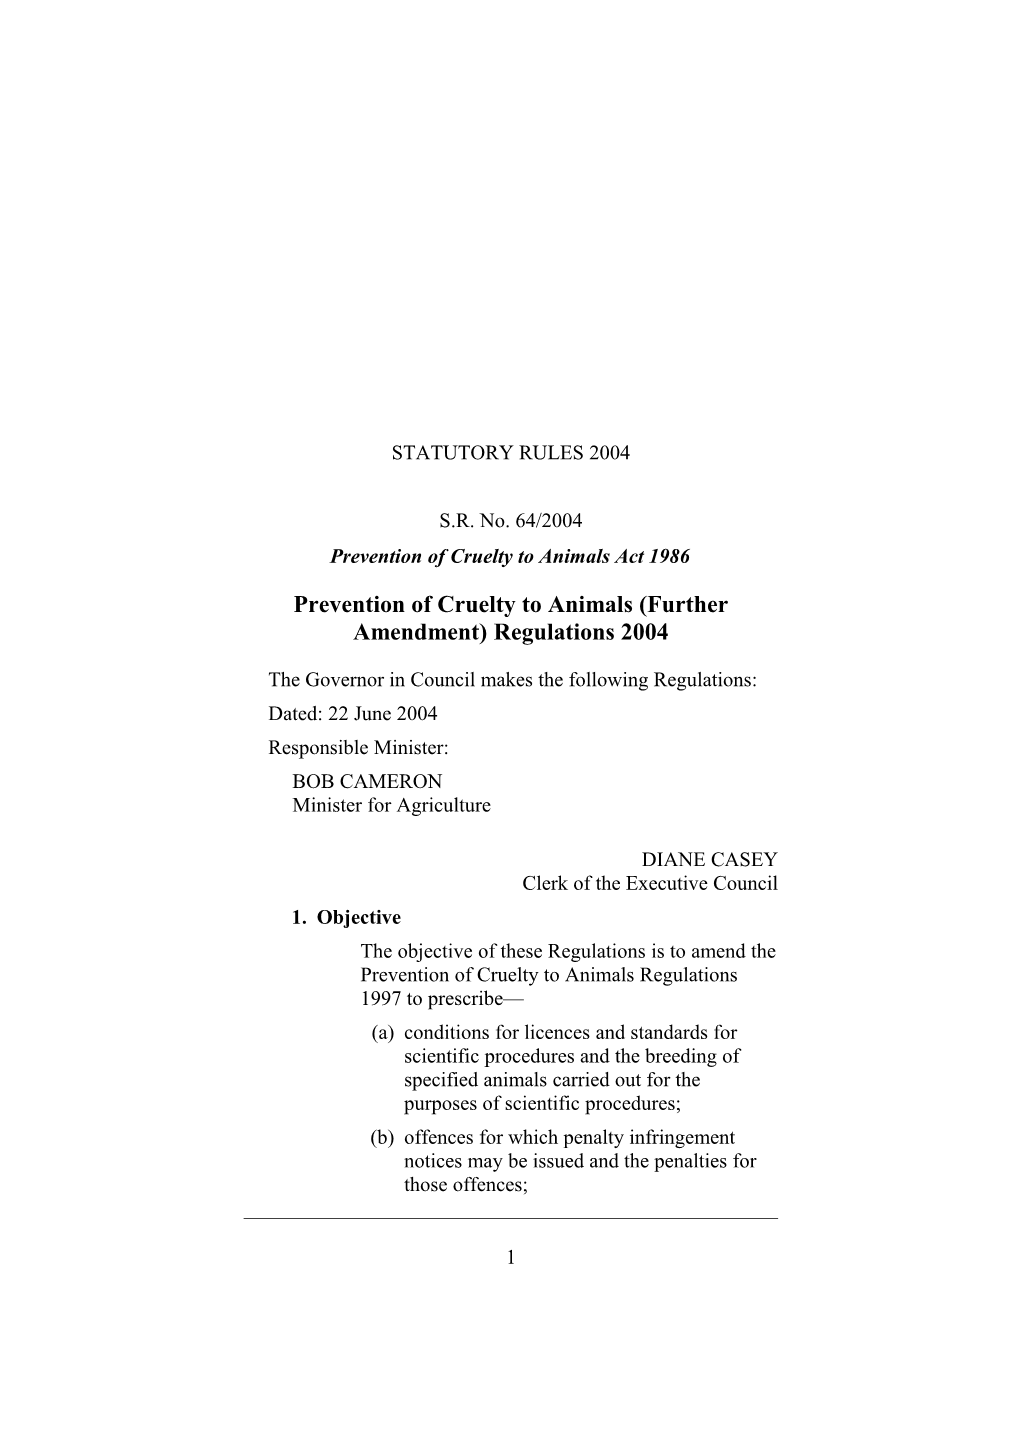 Prevention of Cruelty to Animals (Further Amendment) Regulations 2004